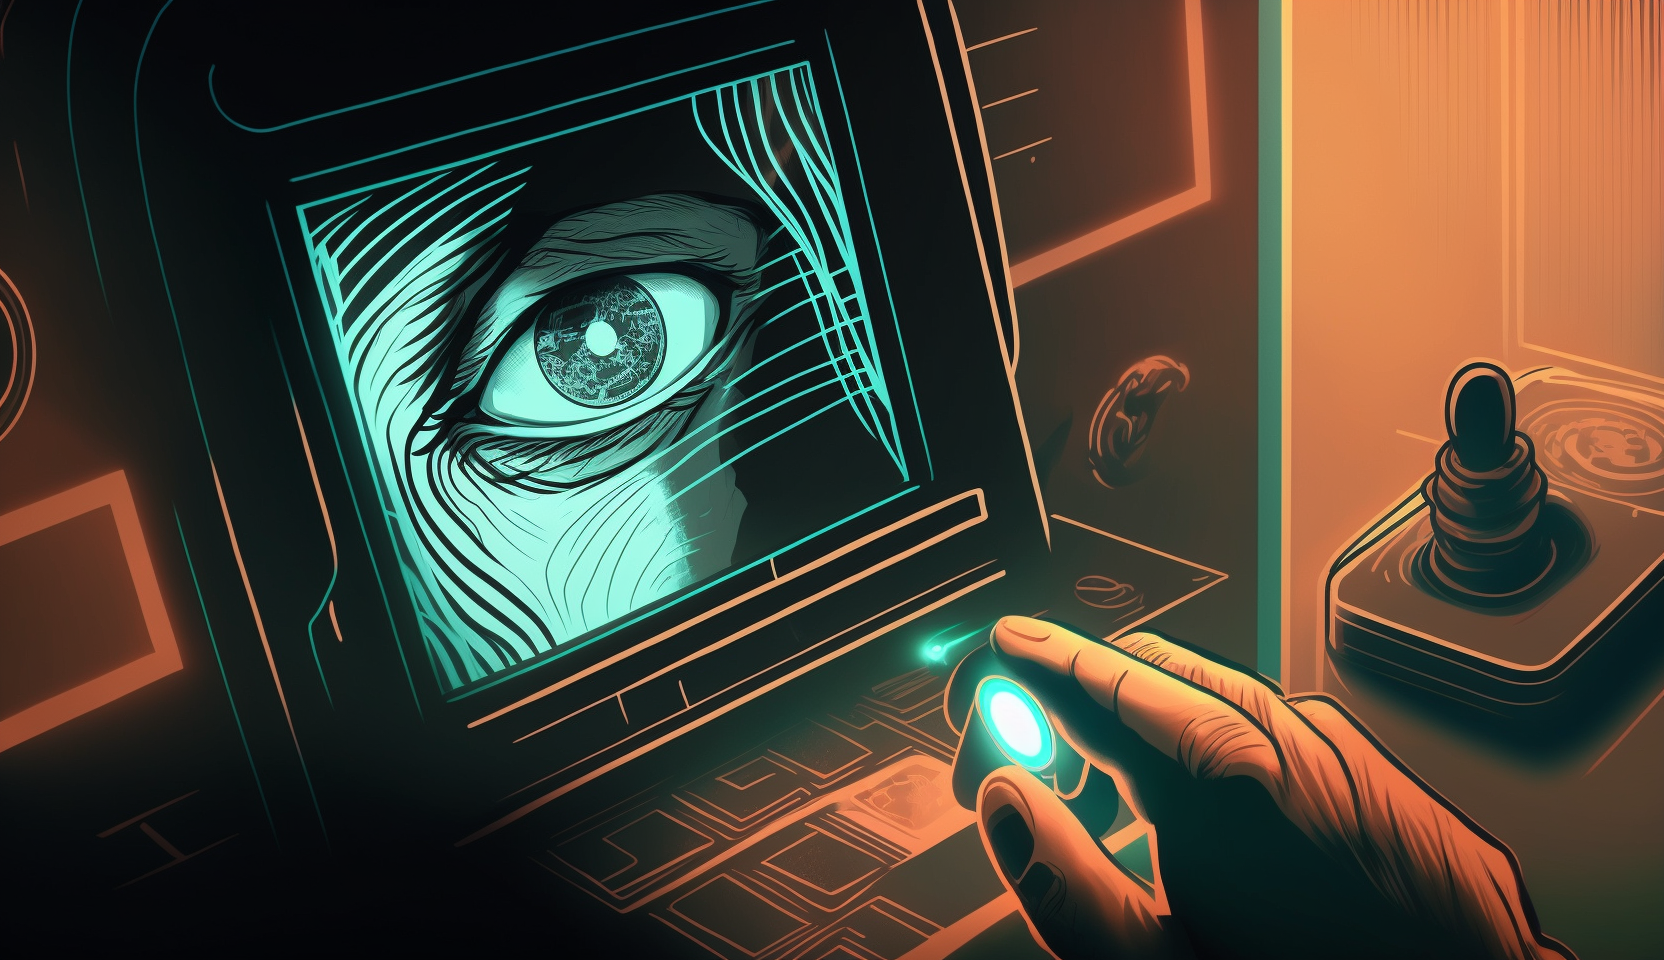 An animated illustration of a person's hand using a fingerprint scanner to access a secured area, with a person's face and iris also visible in the background.